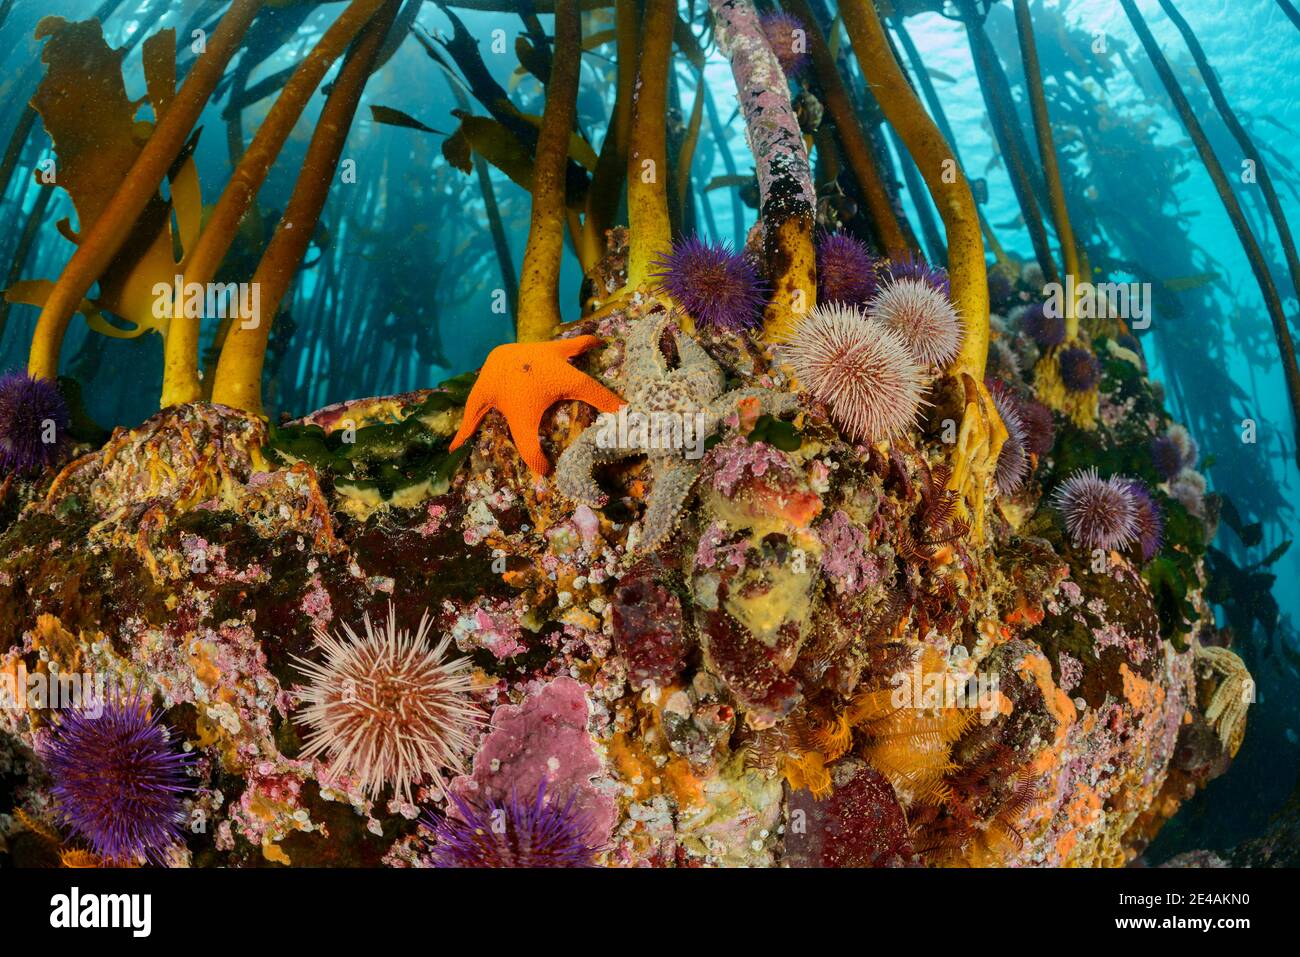 Kelp forest (Ecklonia maxima) with sea urchins and starfish, False Bay, Simons Town, South Africa, Indian Ocean Stock Photo